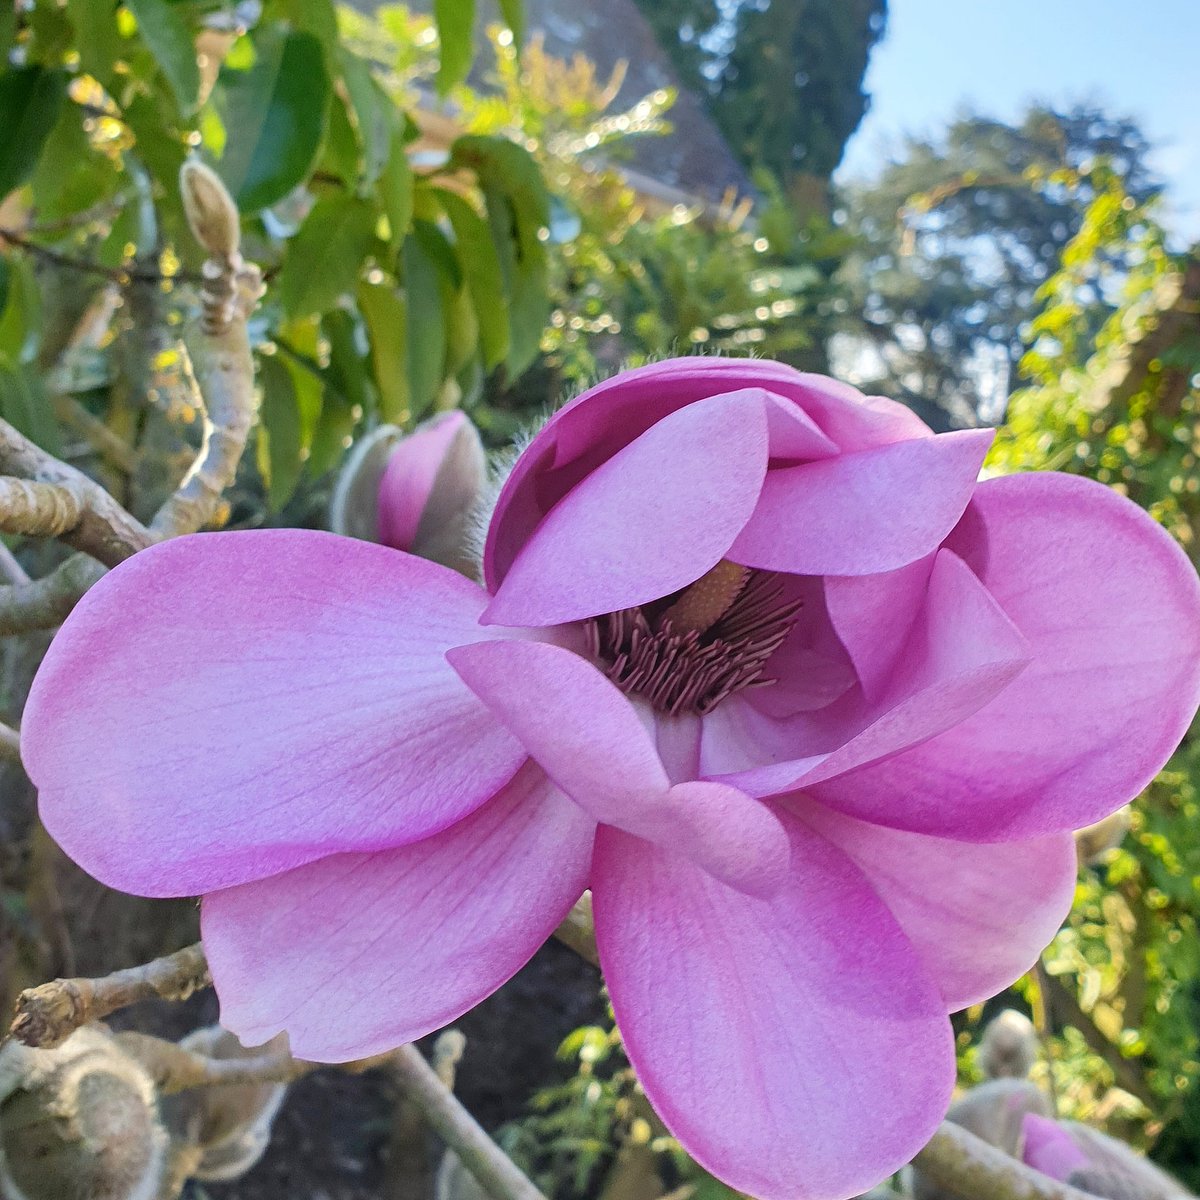 How beautiful has today been! I visited the awesome @BrisBotanicGdn and bumped into this beautiful magnolia 😍. #garden #gardening #gardenshour #